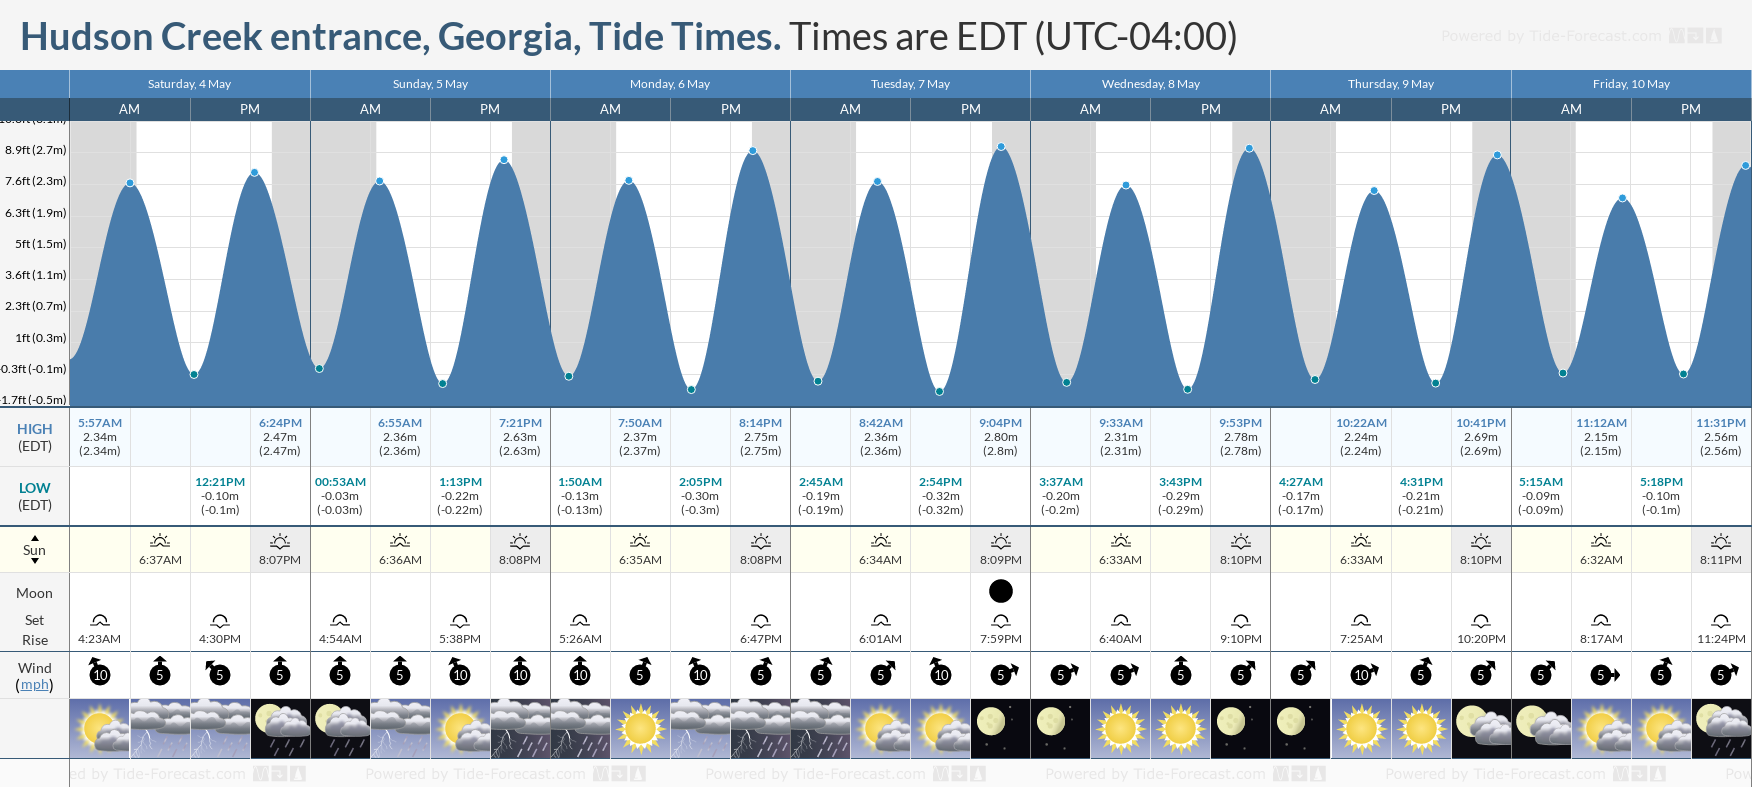 Hudson Creek entrance, Georgia Tide Chart including high and low tide times for the next 7 days